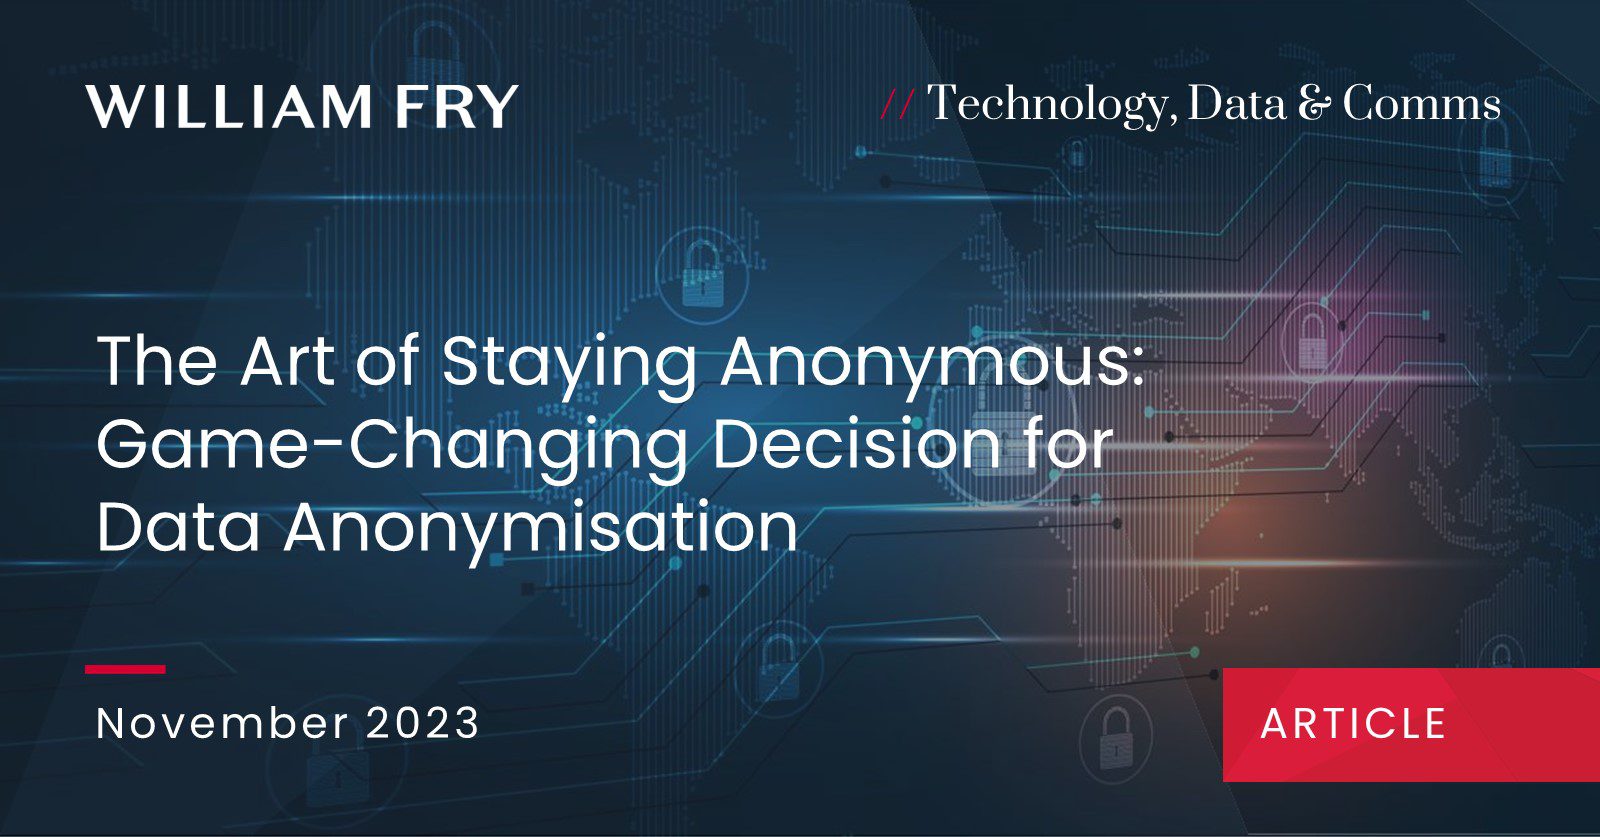 The Art of Staying Anonymous: Game-Changing Decision for Data Anonymisation